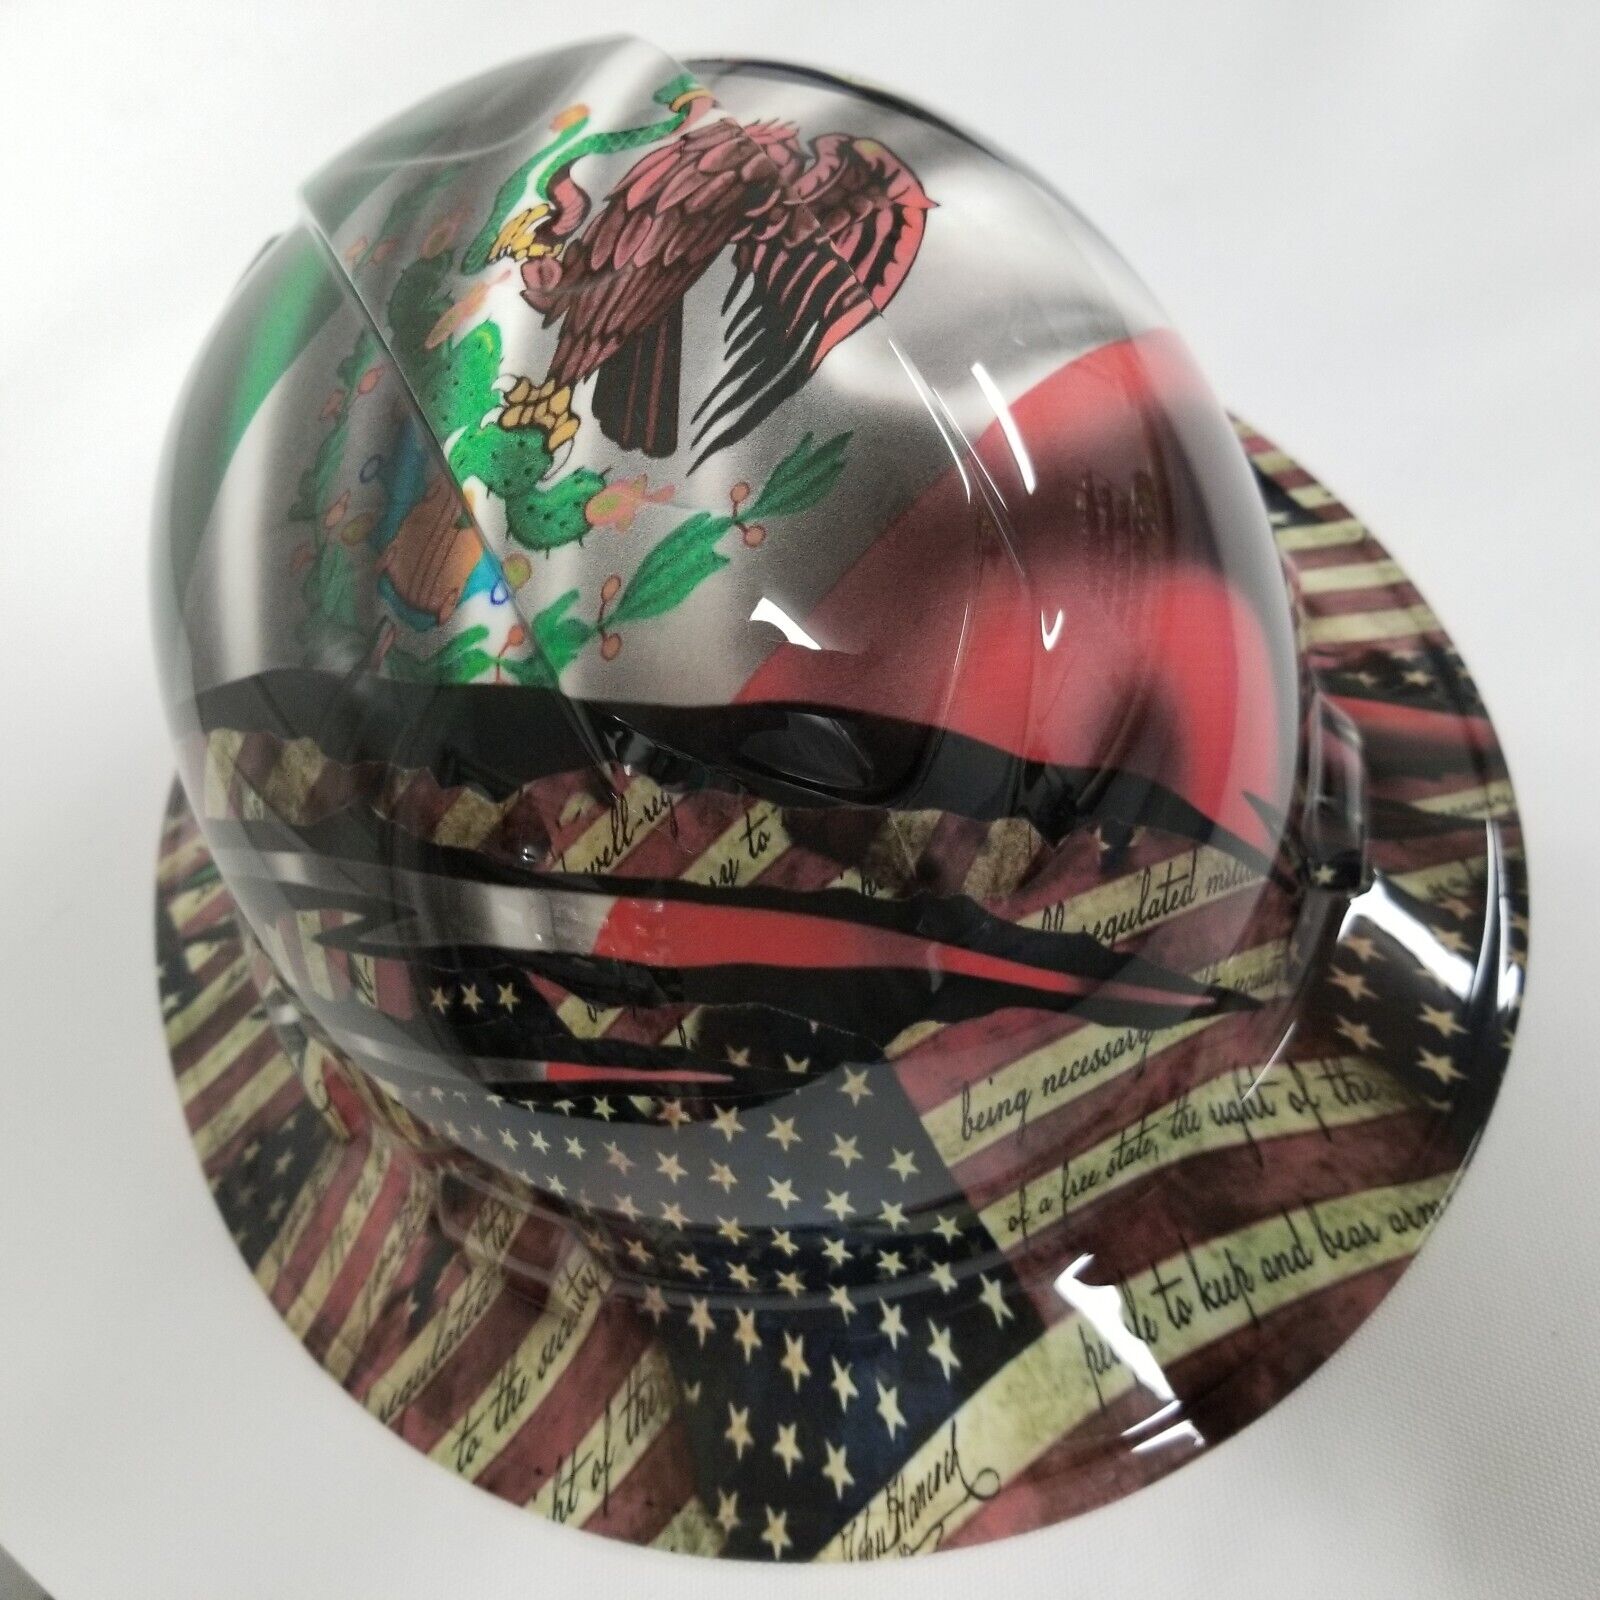 NEW FULL BRIM Hard Hat custom hydro dipped MEXICAN ROOTS/AMERICAN PRIDE  NEW